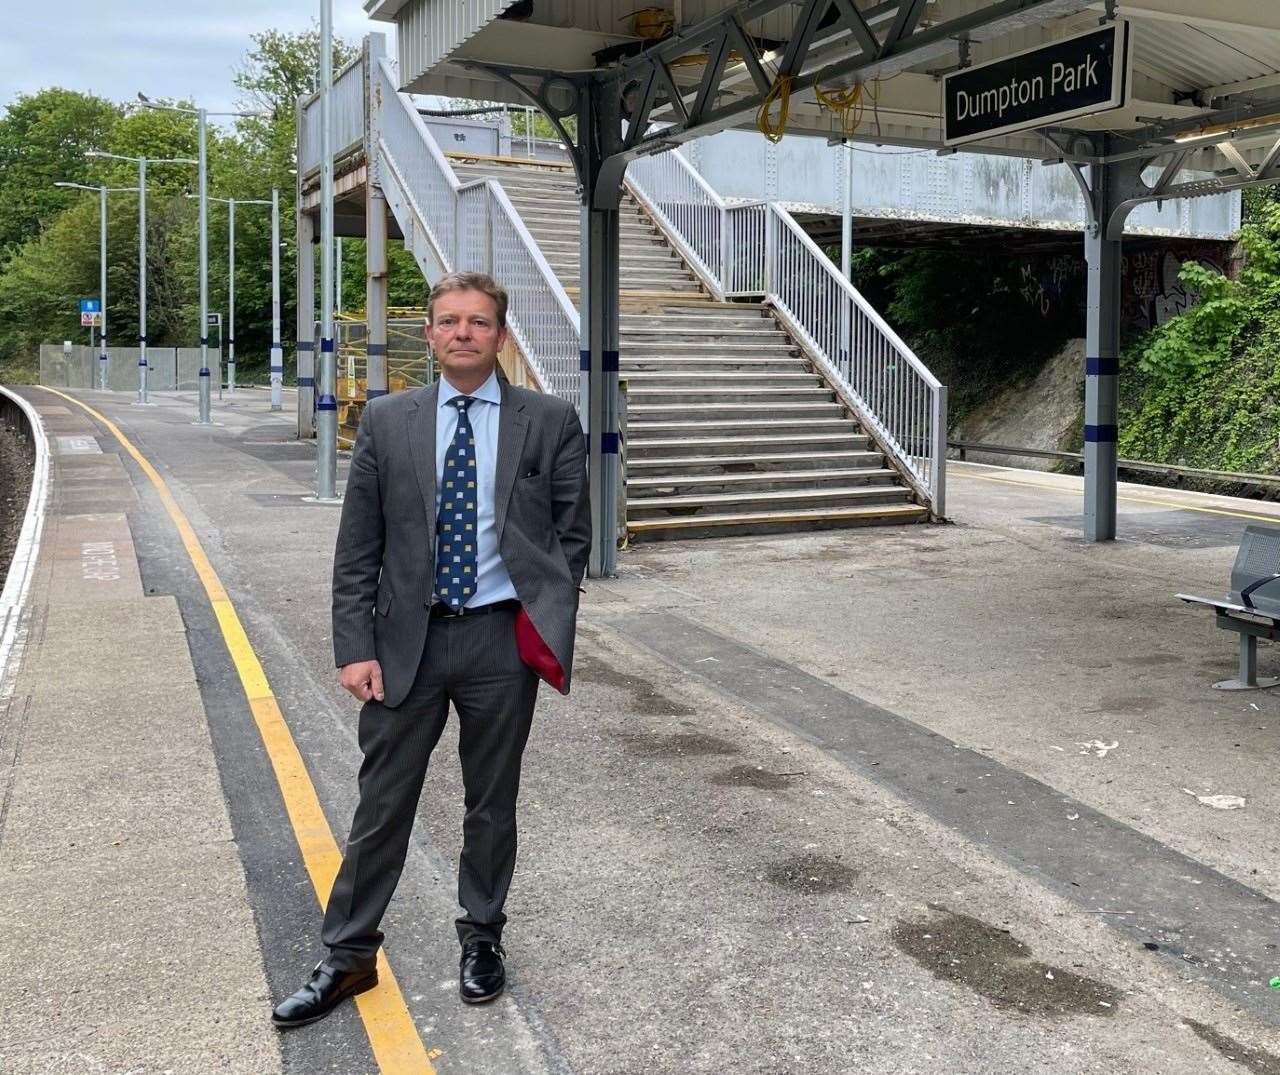 Mr Mackinlay on the platform edge at Dumpton Park Station off Hereson Road, Ramsgate. Picture: Office of Craig Mackinlay MP